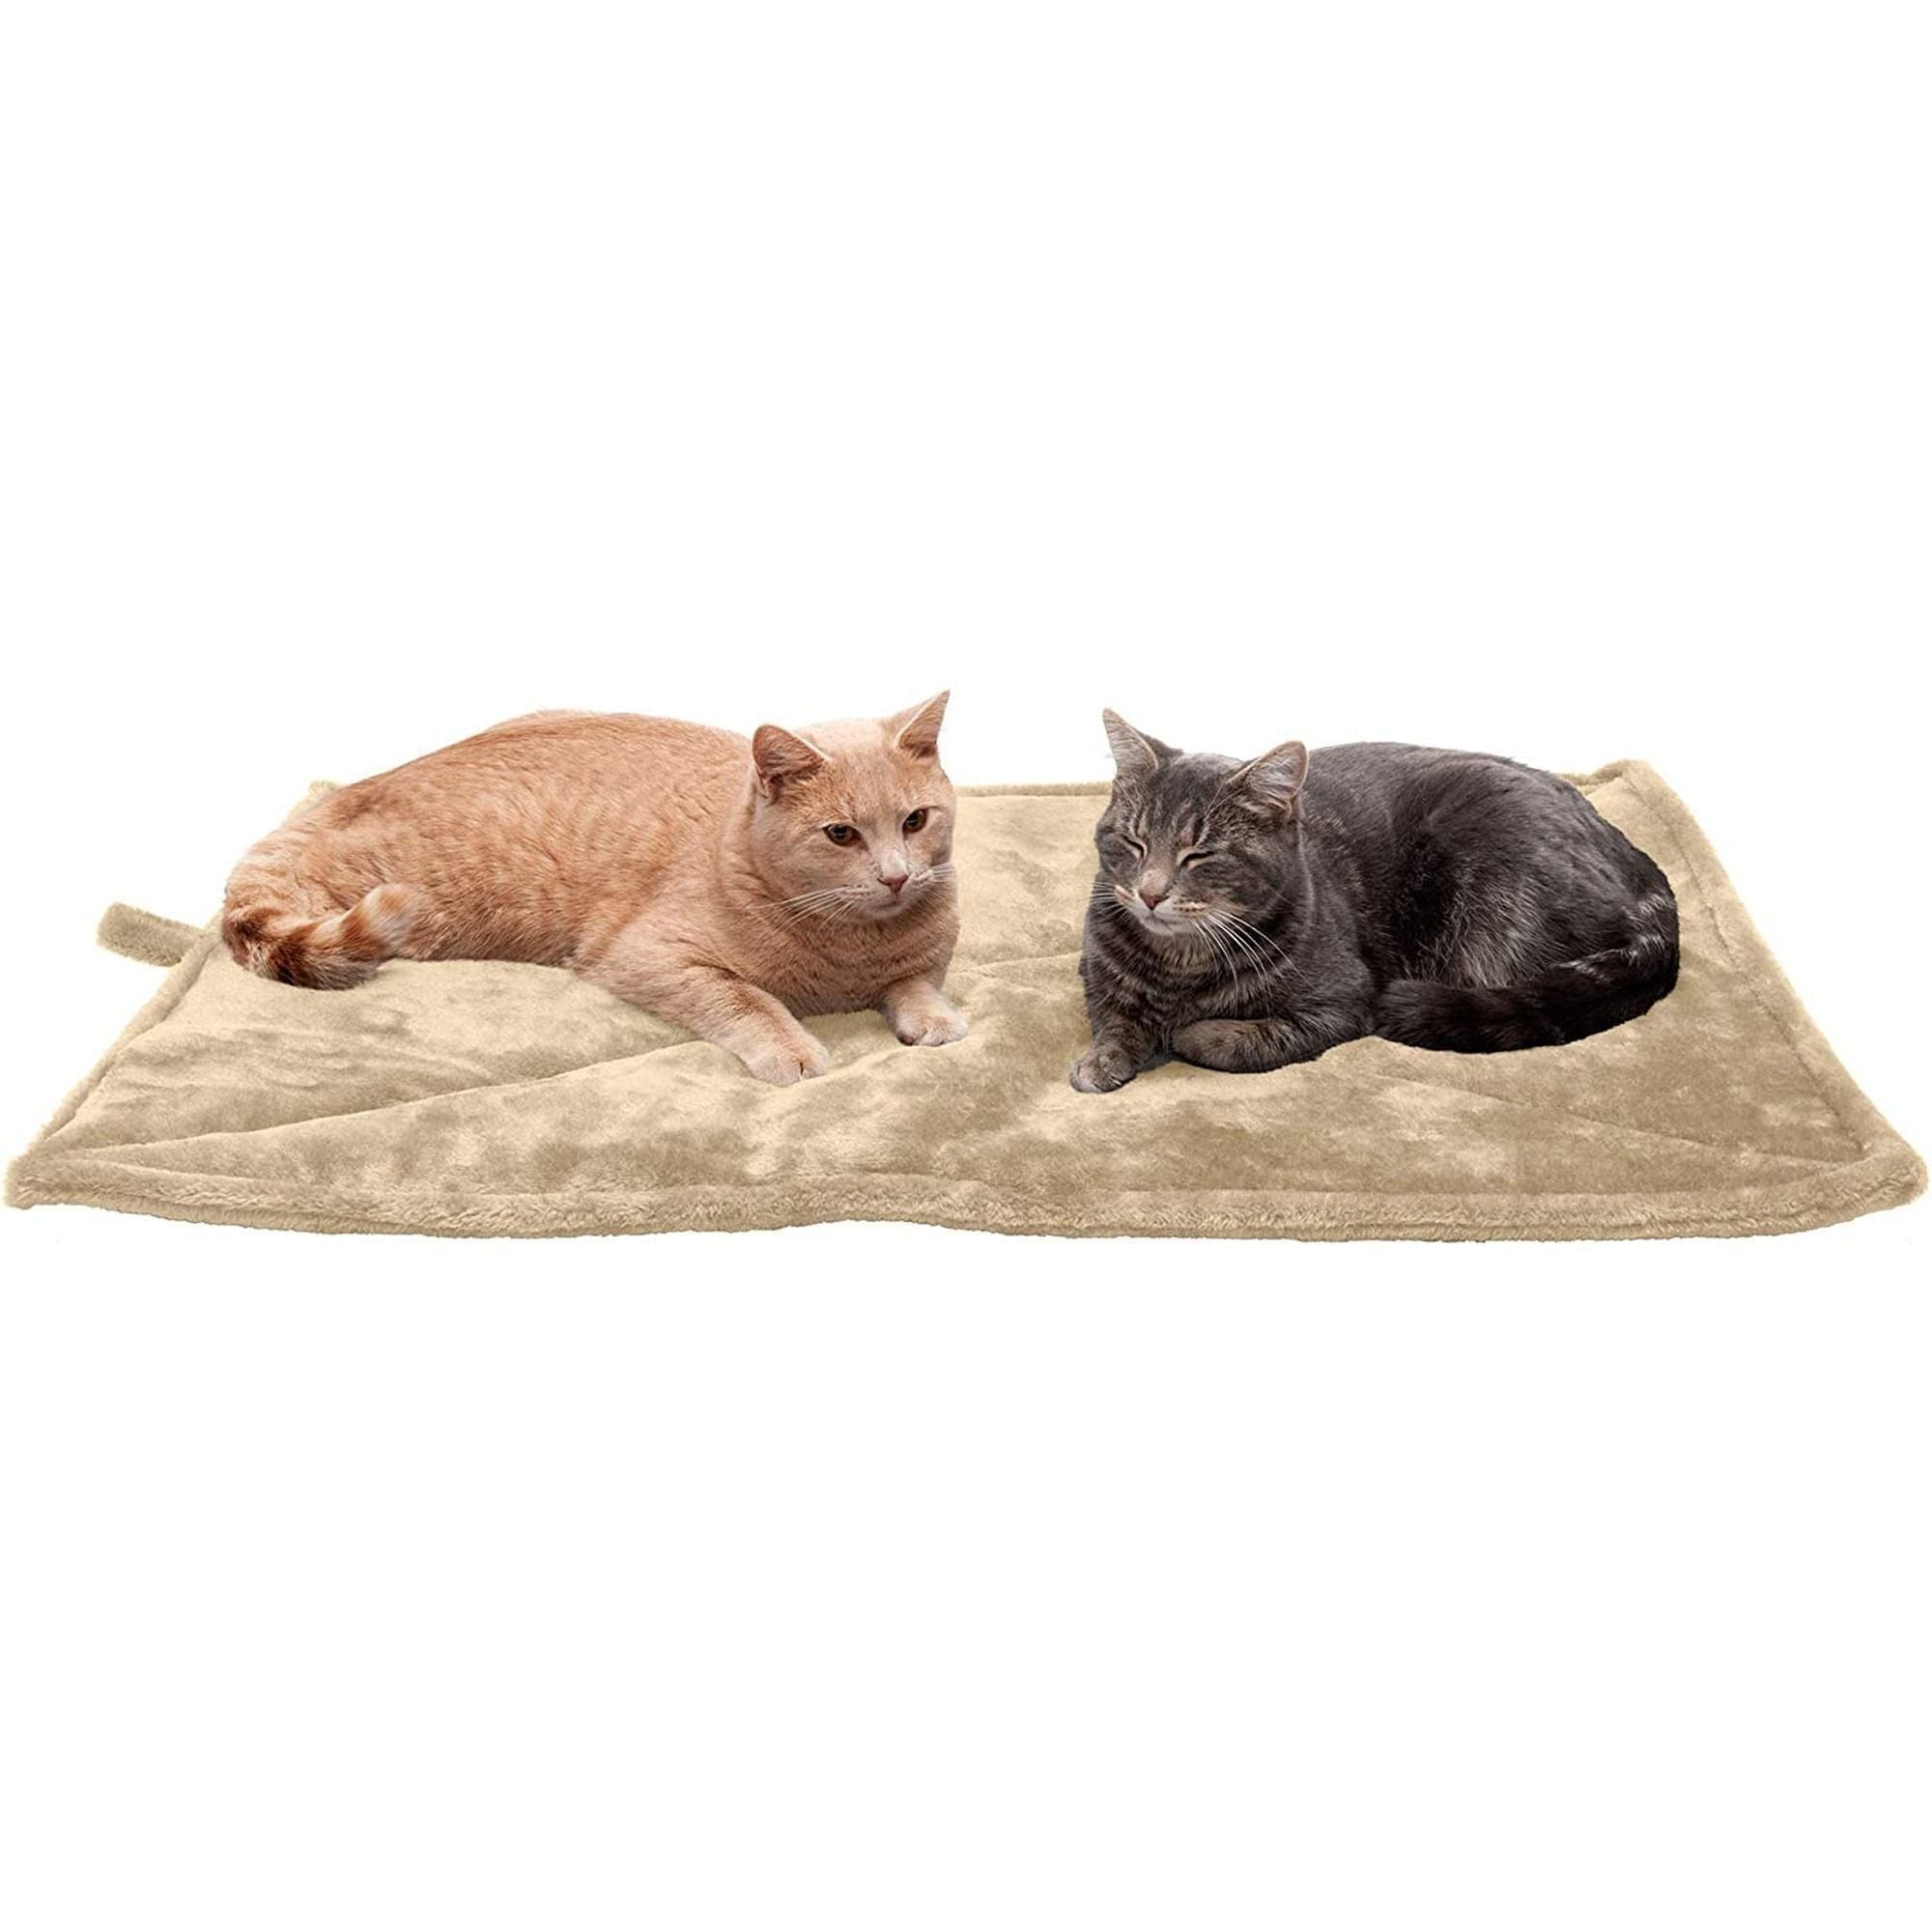 Pet Products - Thermanap Cat Bed Pad, Thermanap Dog Blanket Mat, Self-Warming Waterproof Throw Blanket, Muddy Paws Absorbent Towel Floor Rug, and More